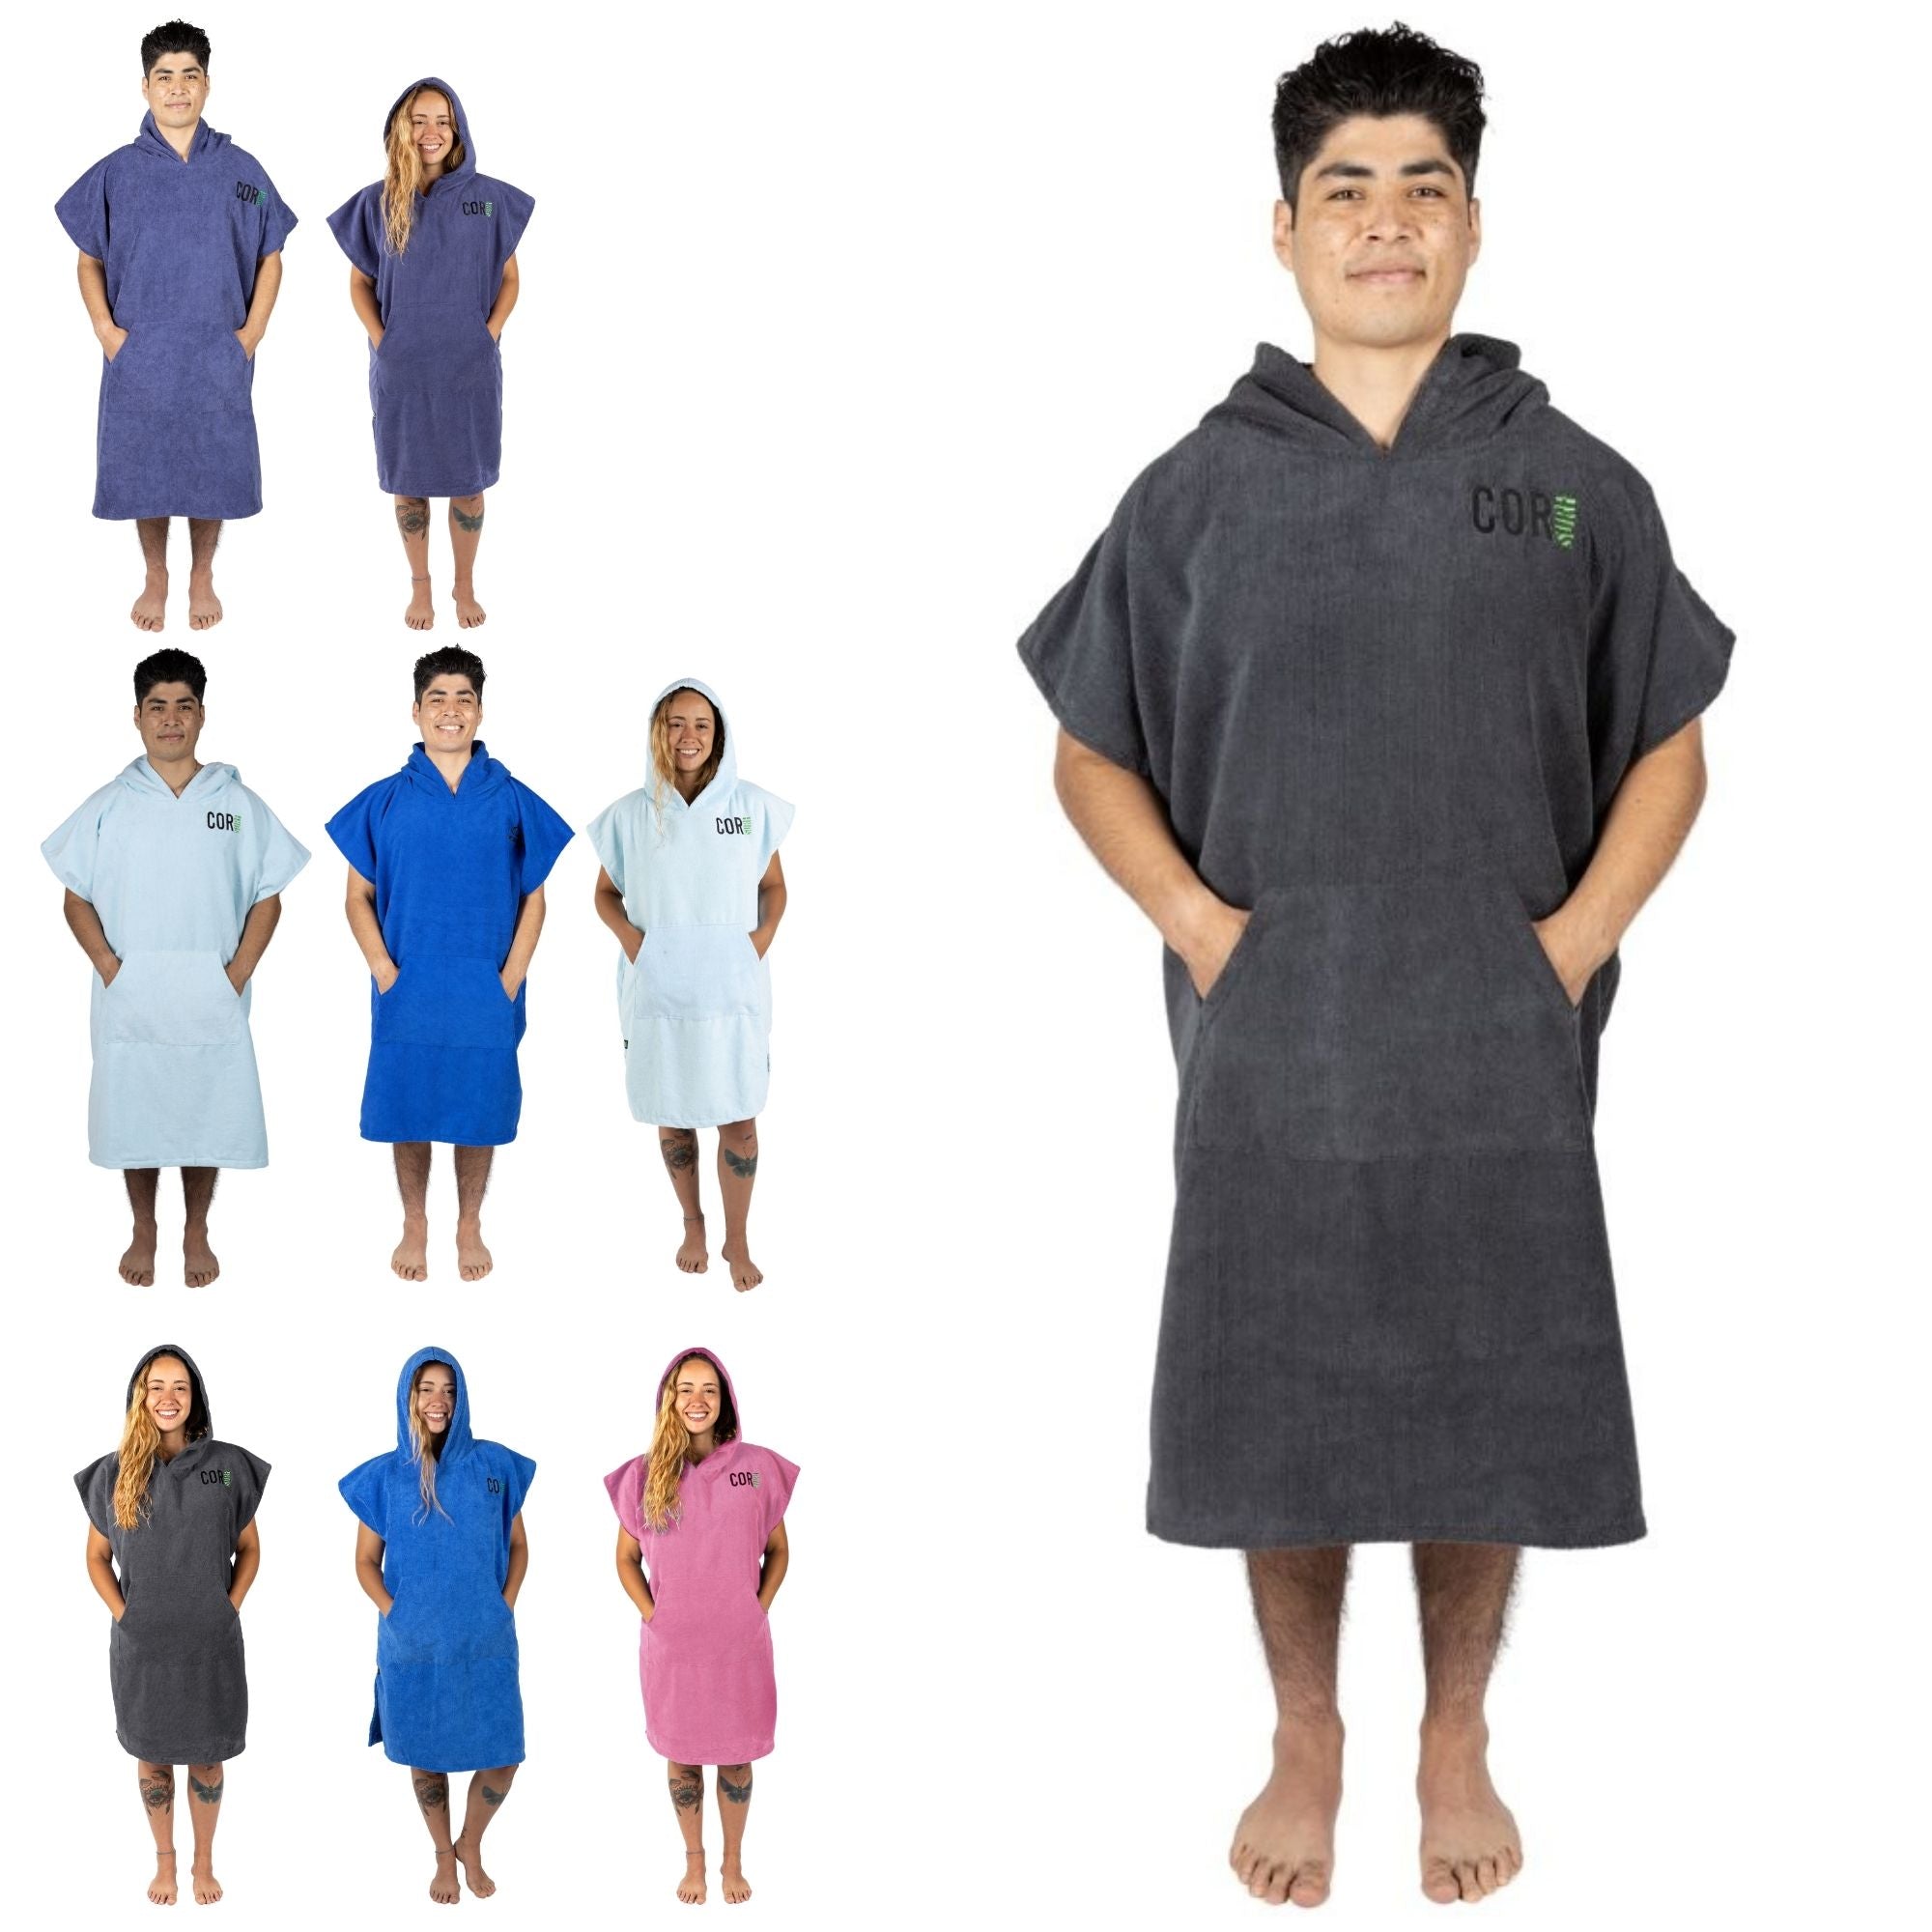 COR Surf Poncho Changing Towel Robe with Hood and Front Pocket, Made of  Quick Dry Microfiber (Medium, Sarape)